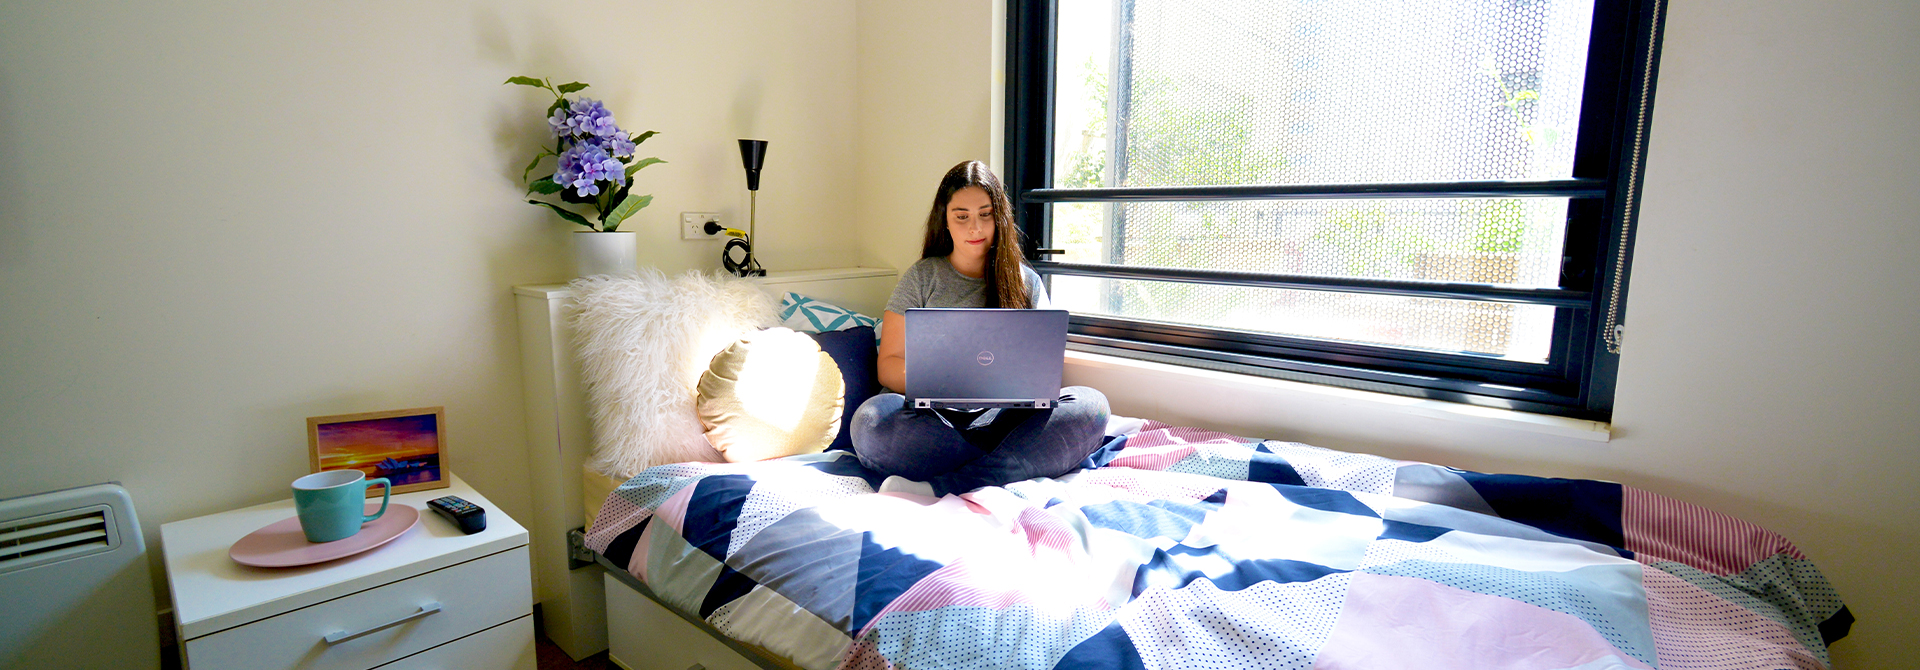 Student in UTS Accommodation using laptop